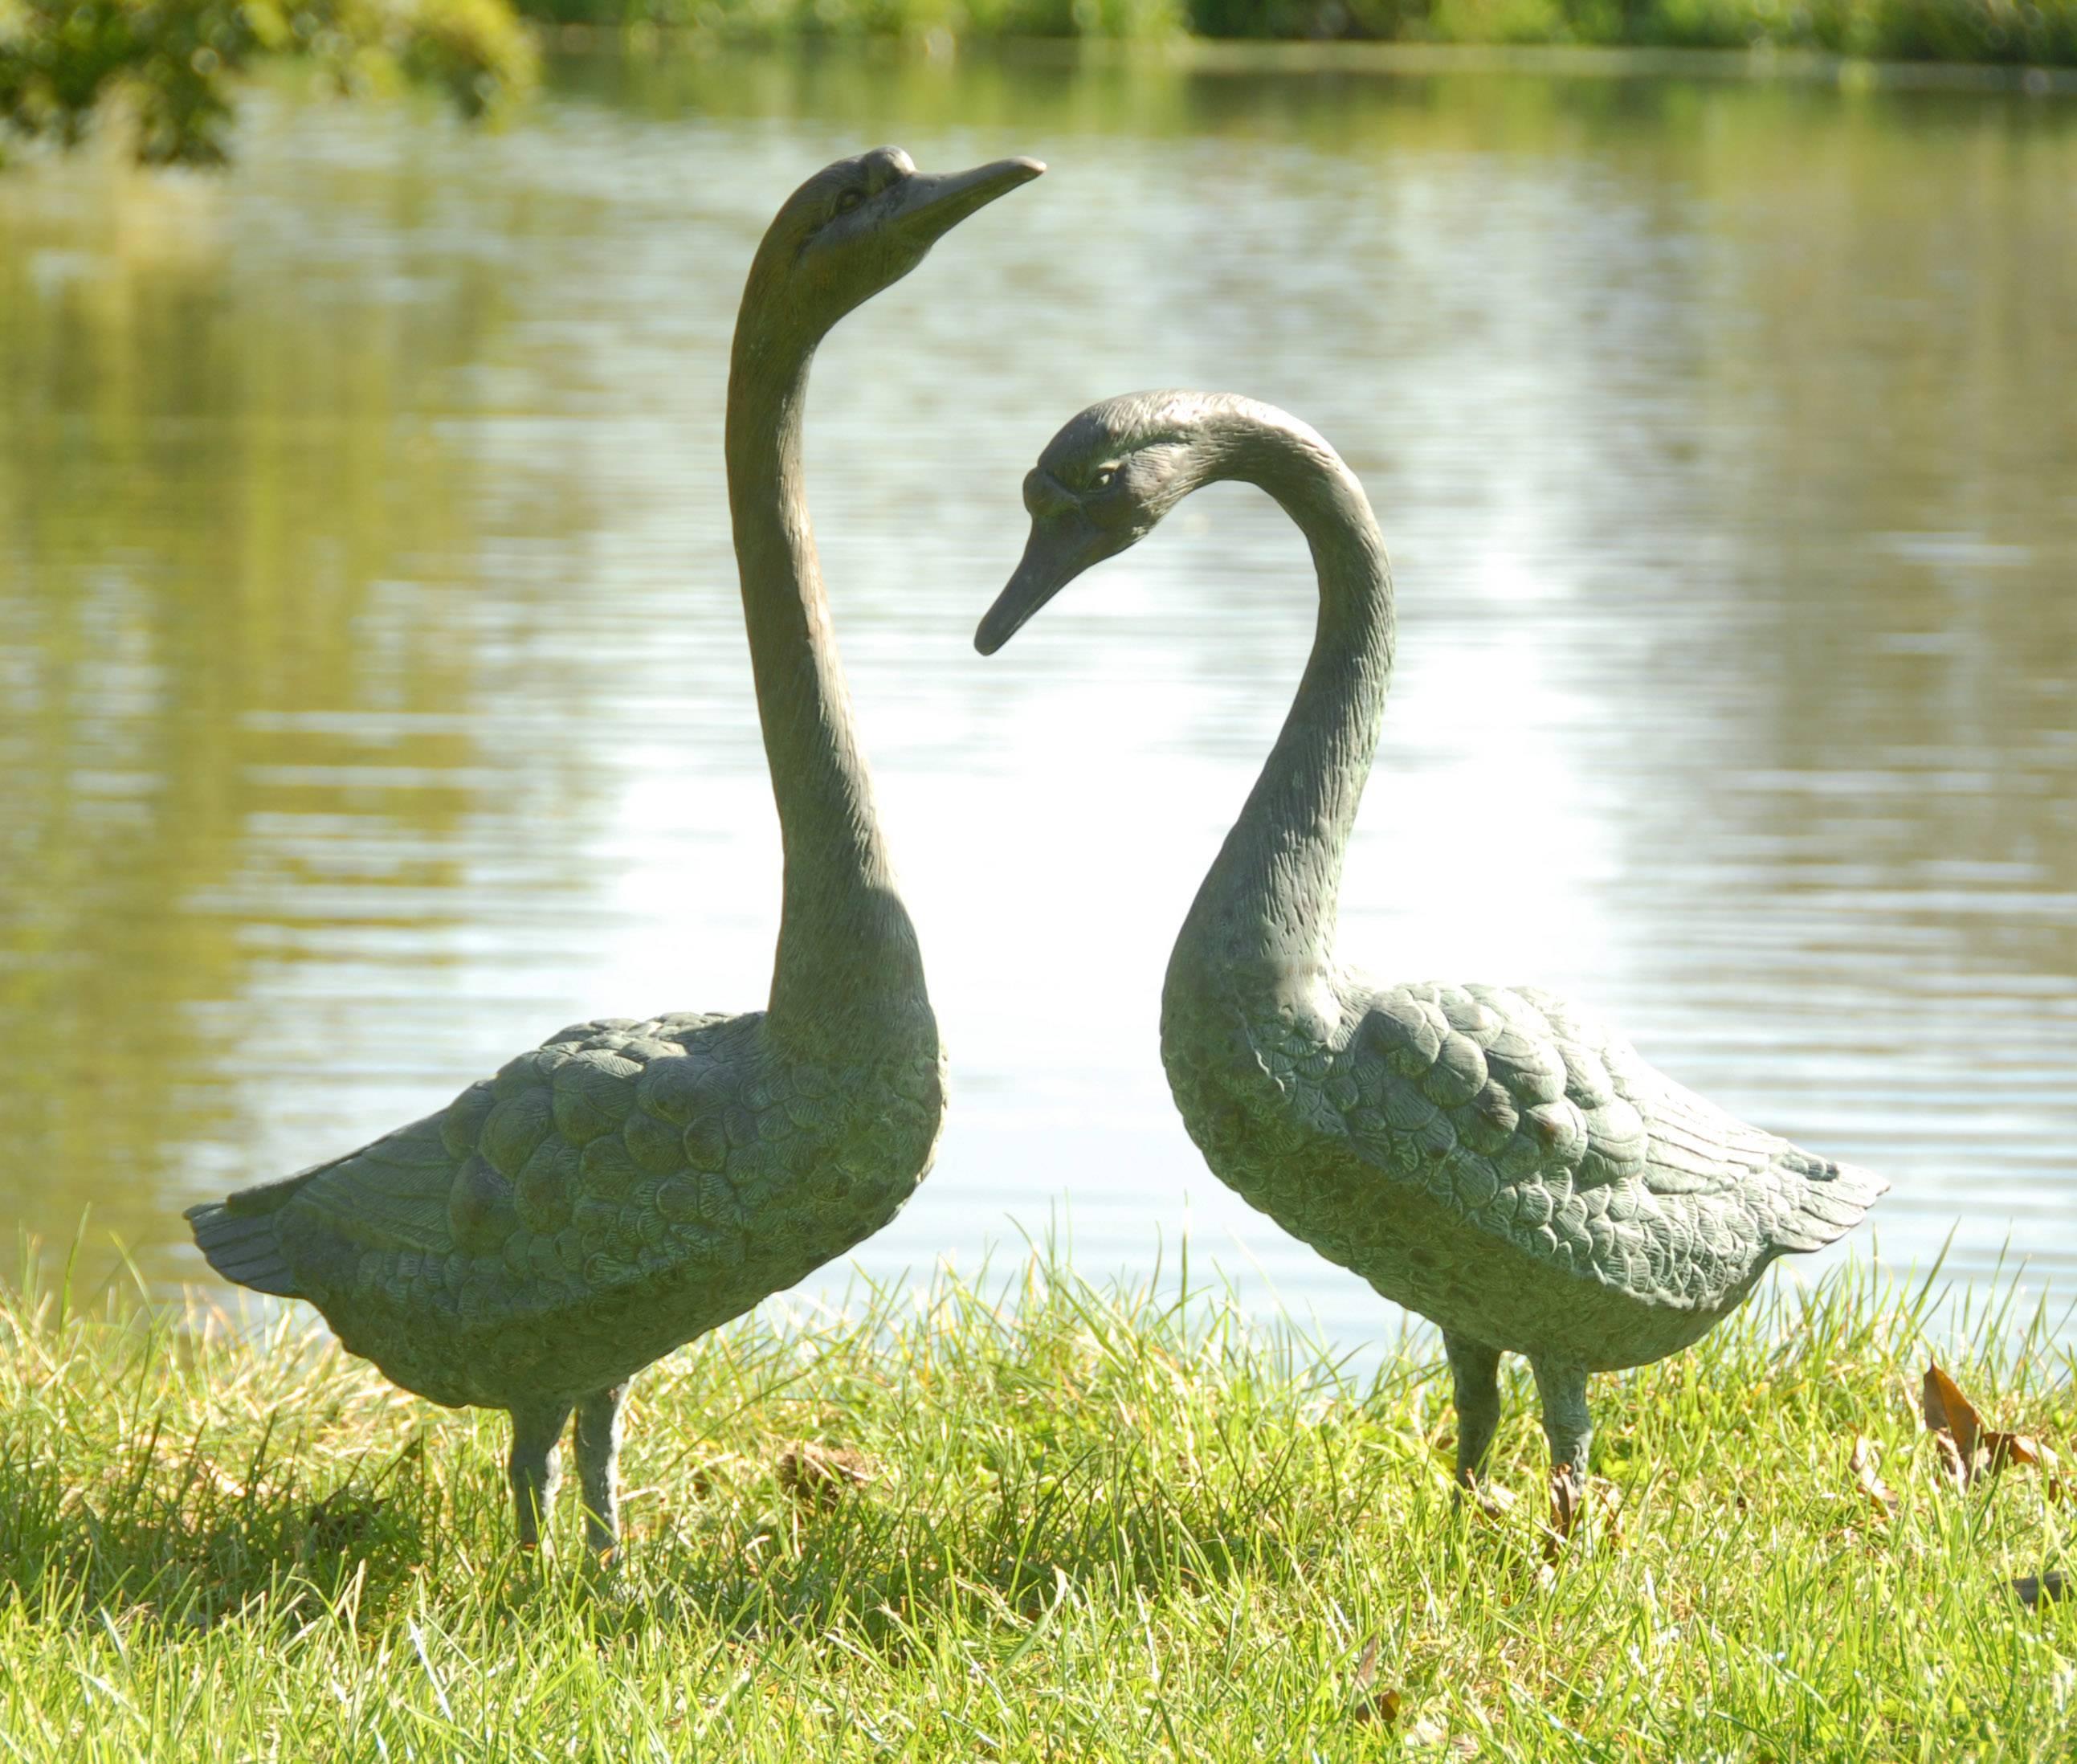 Adorable pair of life-size patinated bronze statues of geese, 20th century freestanding for outdoor or indoor use.
Measure: The tallest is 27 inches high, the other is 22.5 inches high.

Price includes free shipping.
  